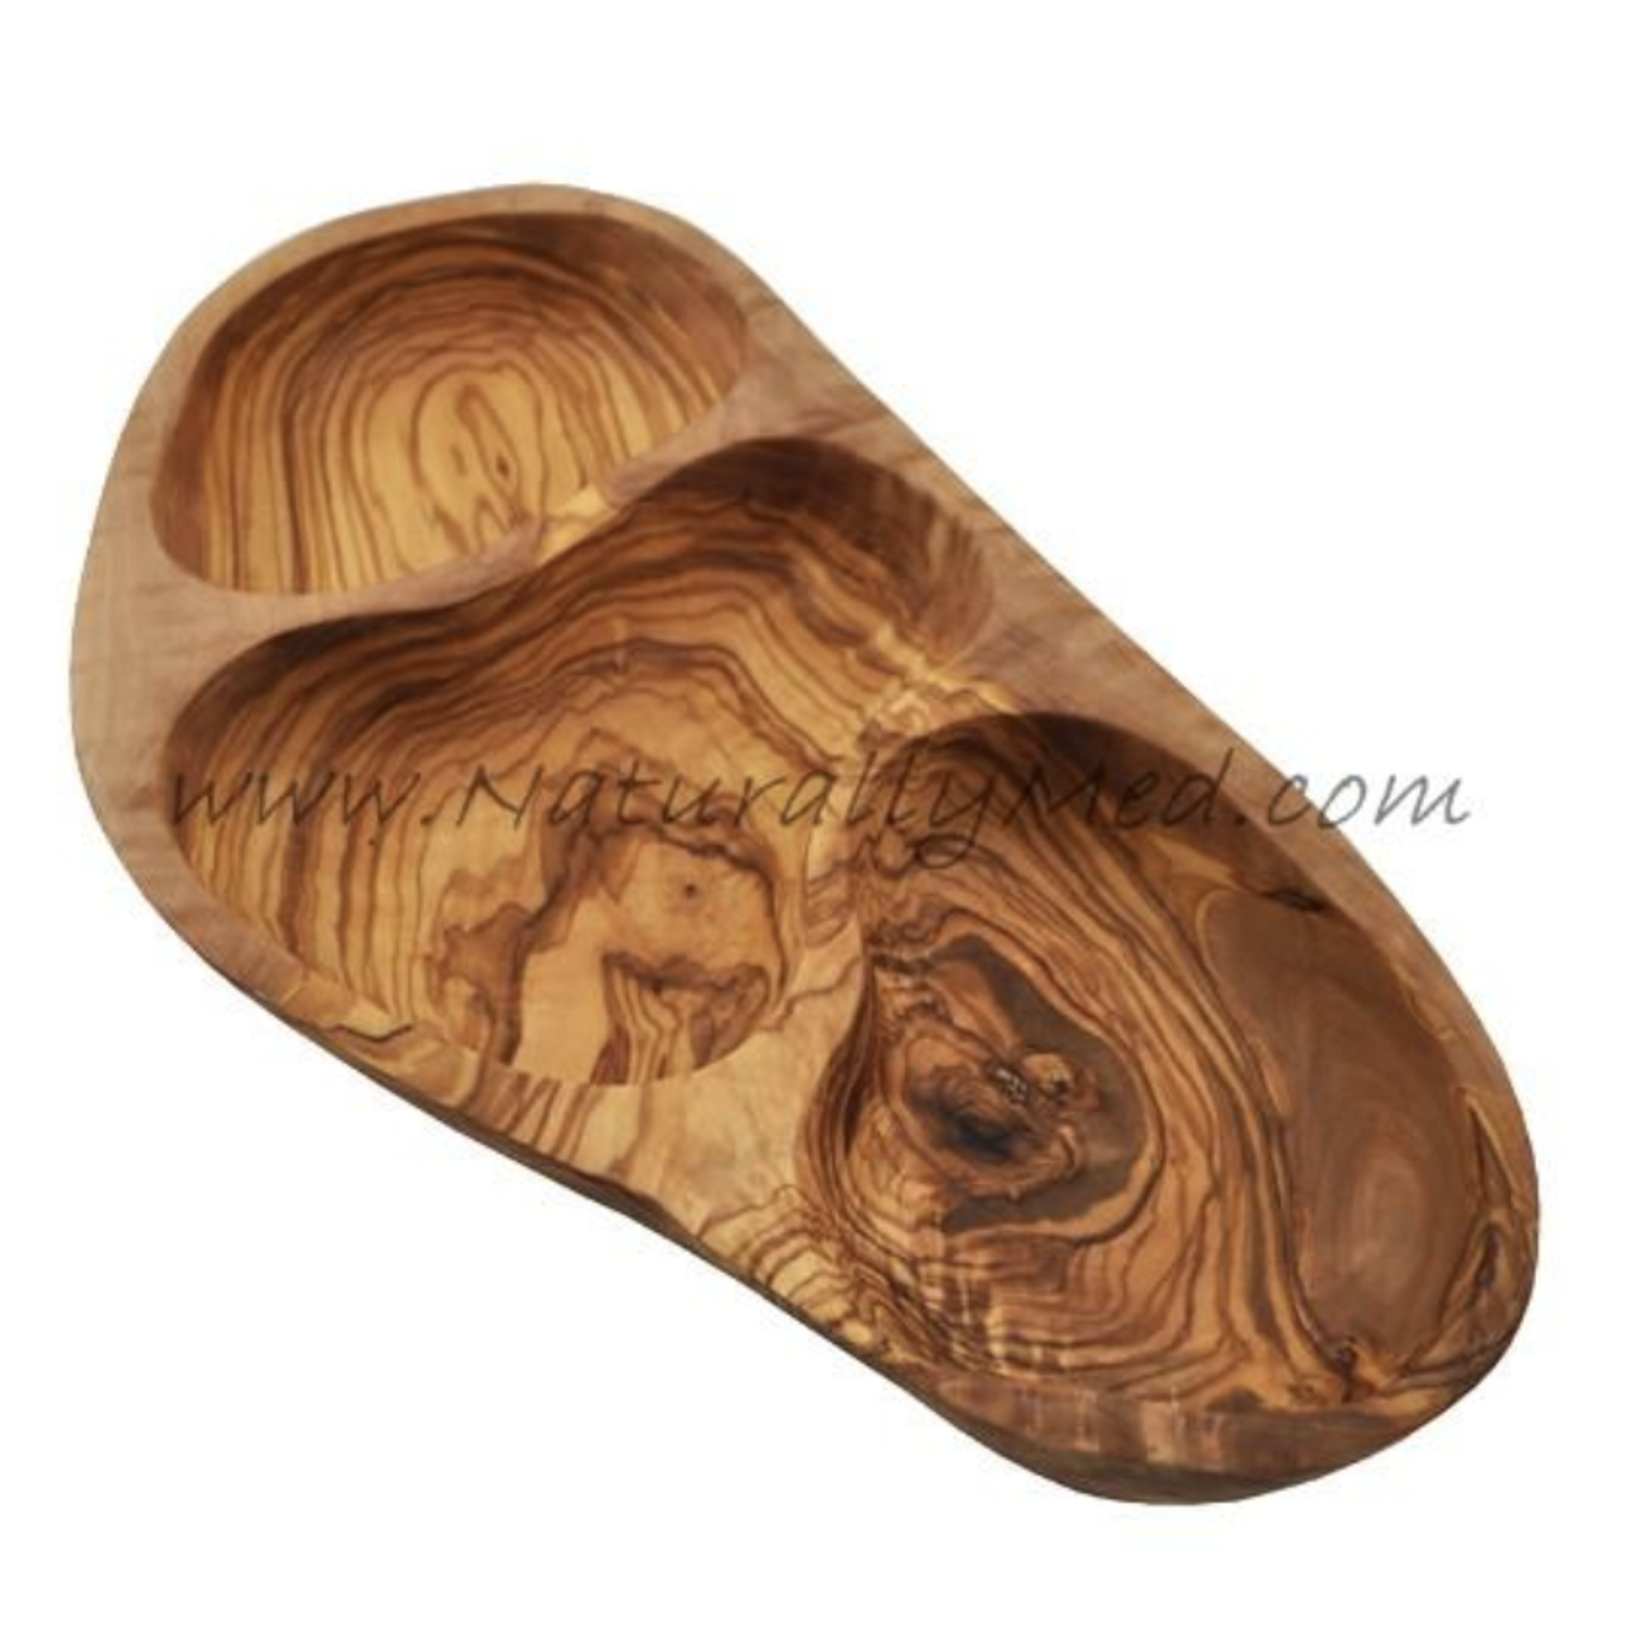 Naturally Med Olive Wood 3 Compartment Appetizer Serving Dish